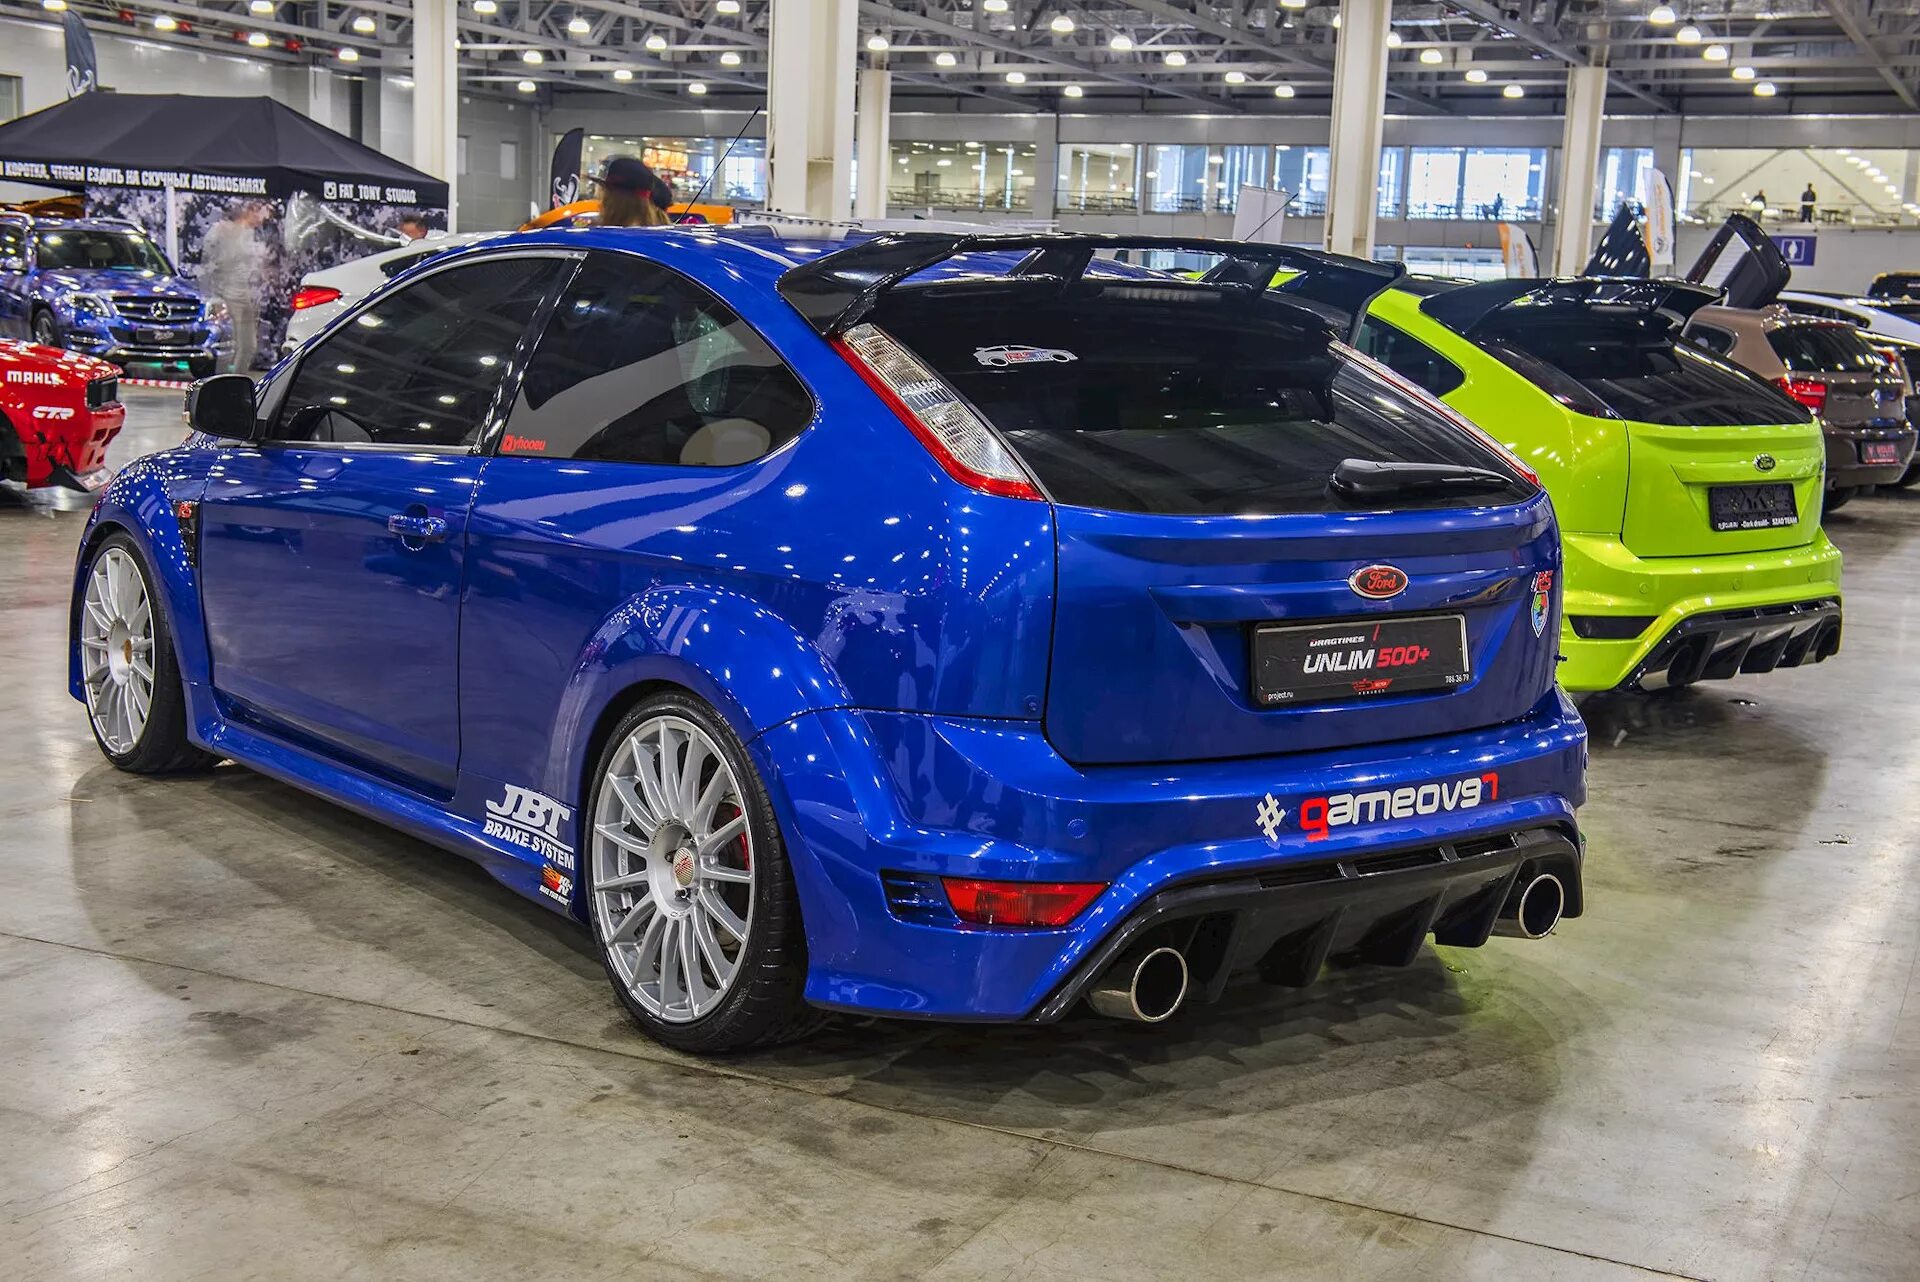 Ст тюнинг. Ford Focus 2 RS Tuning. Ford Focus 2.3 RS. Ford Focus RS 2010. Ford Focus RS 2011.